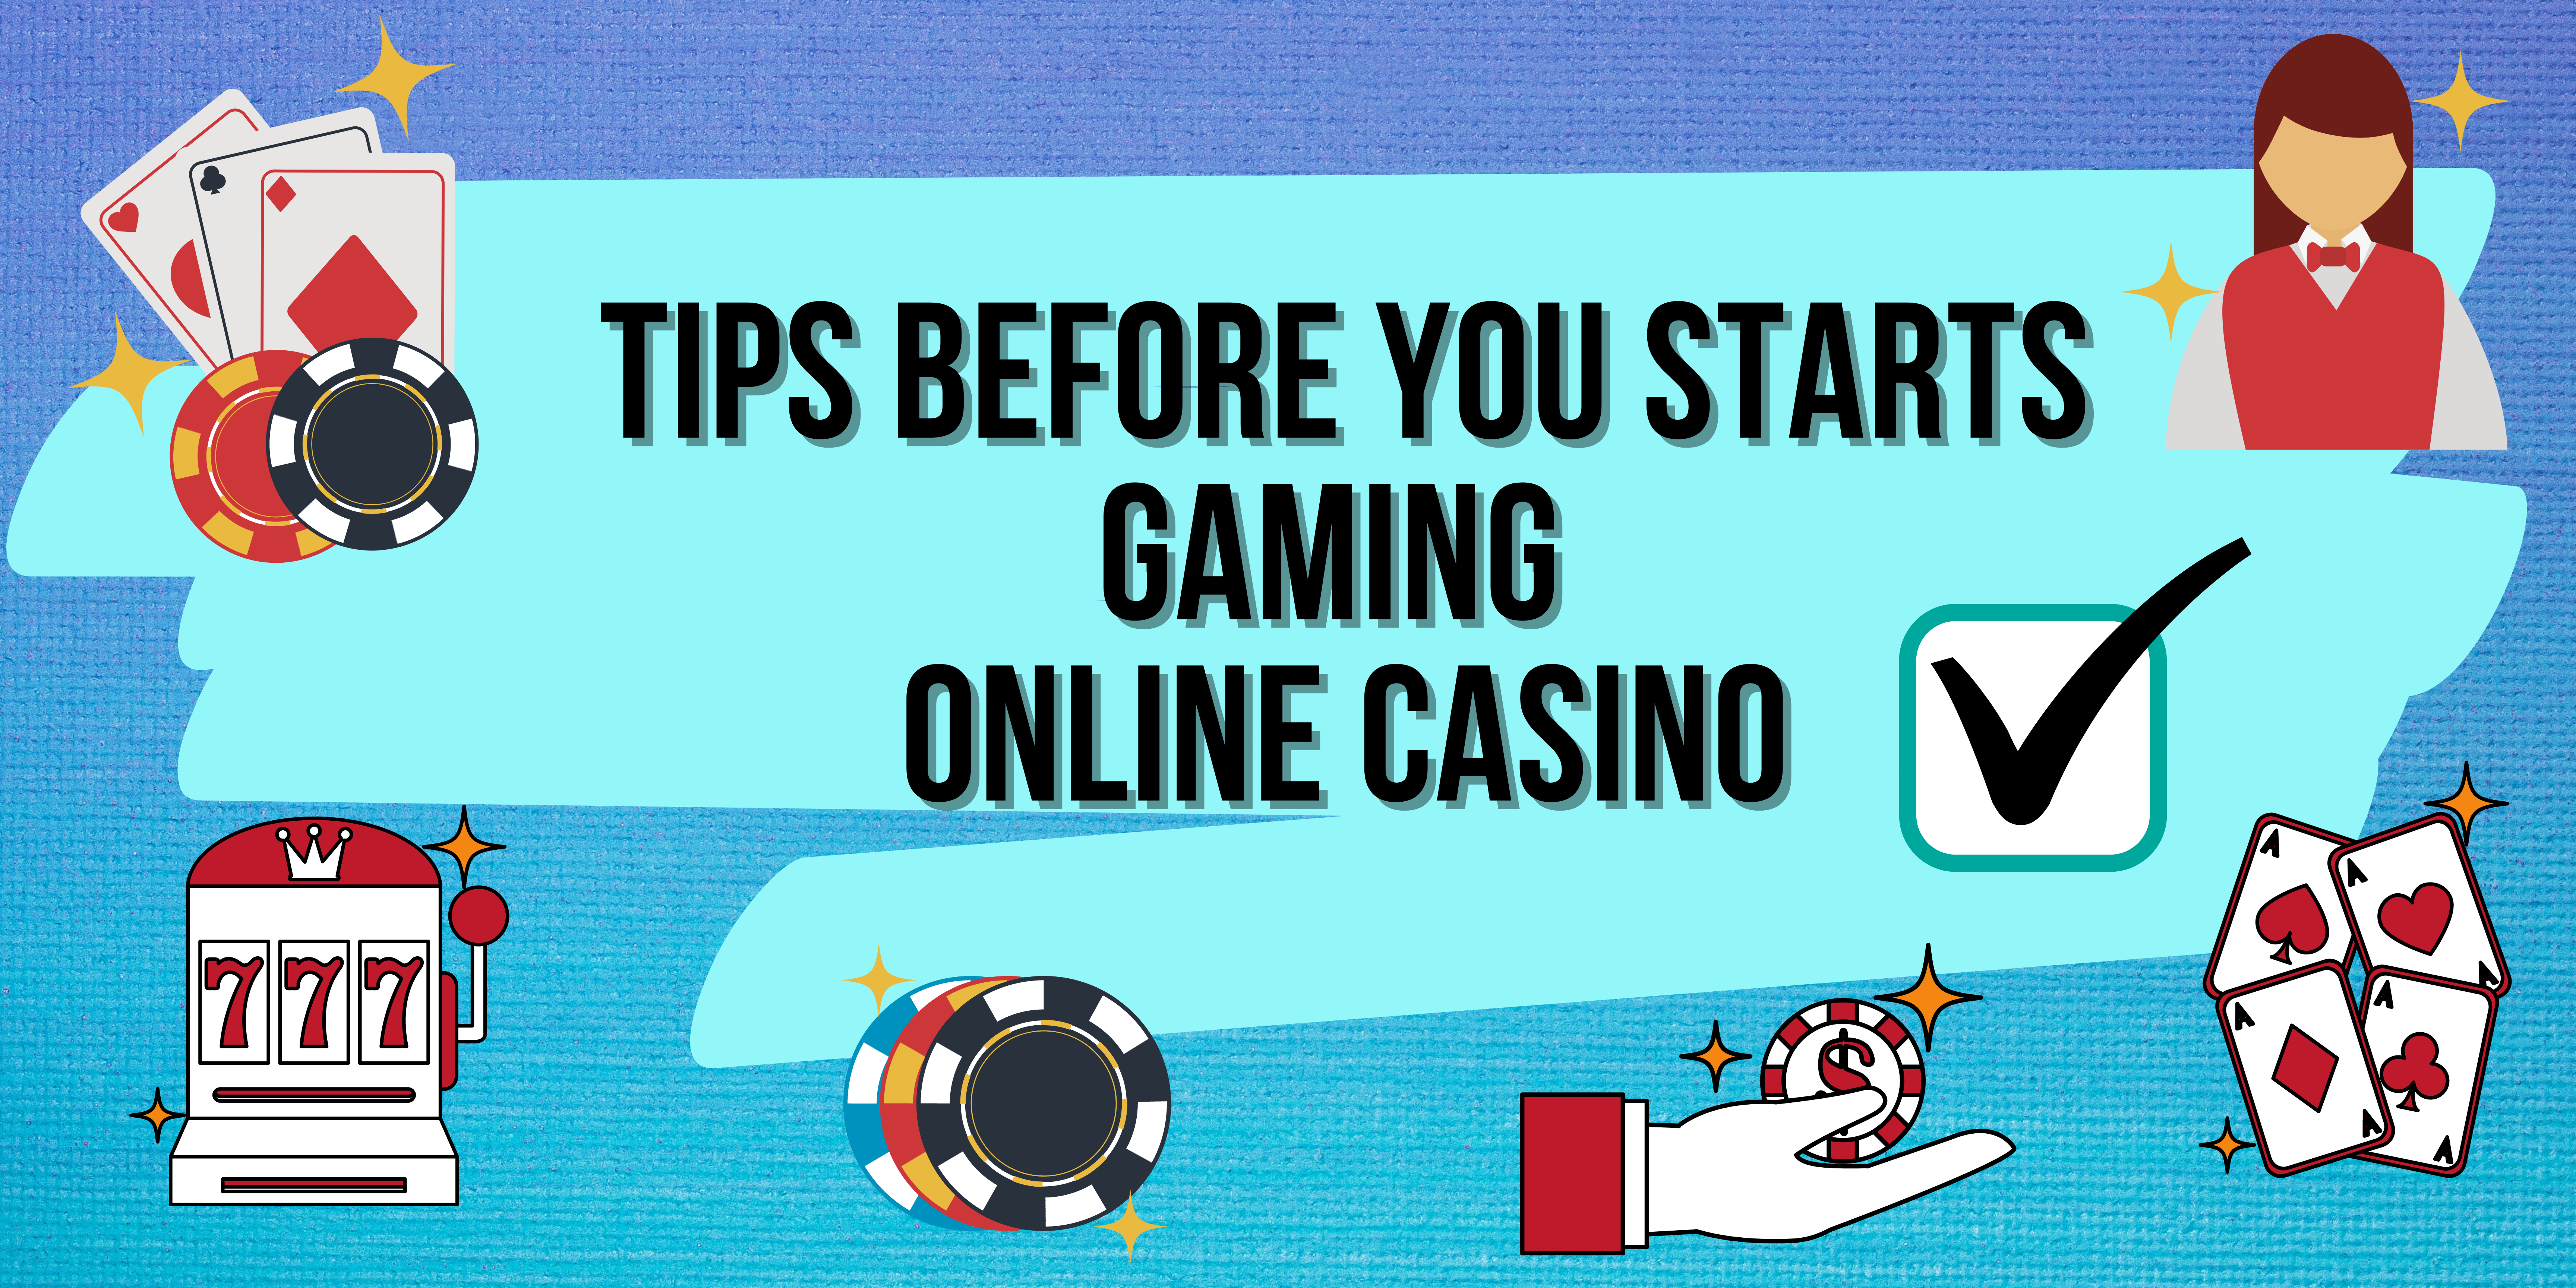 Online Casino Gaming Tips You Should Know Before You Start